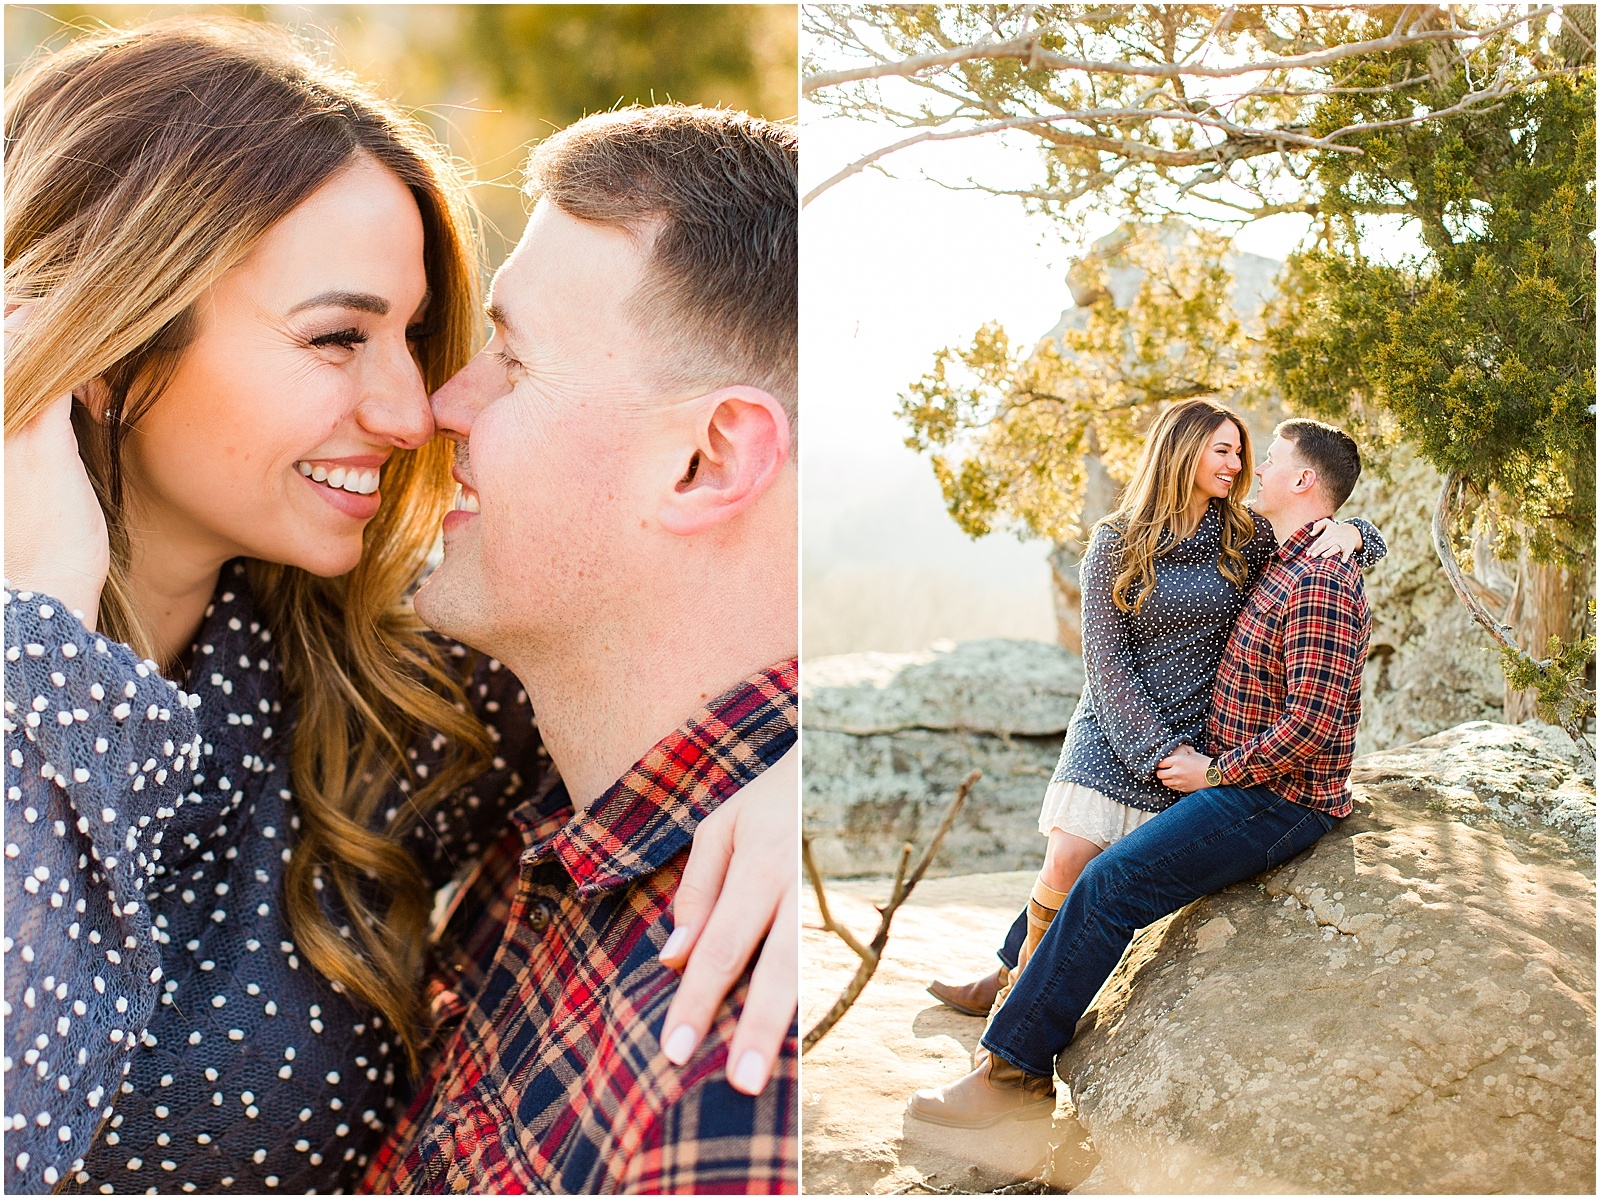 A Sunny Garden of the Gods Engagement Session | Shiloh and Lee | Bret and Brandie Photography017.jpg